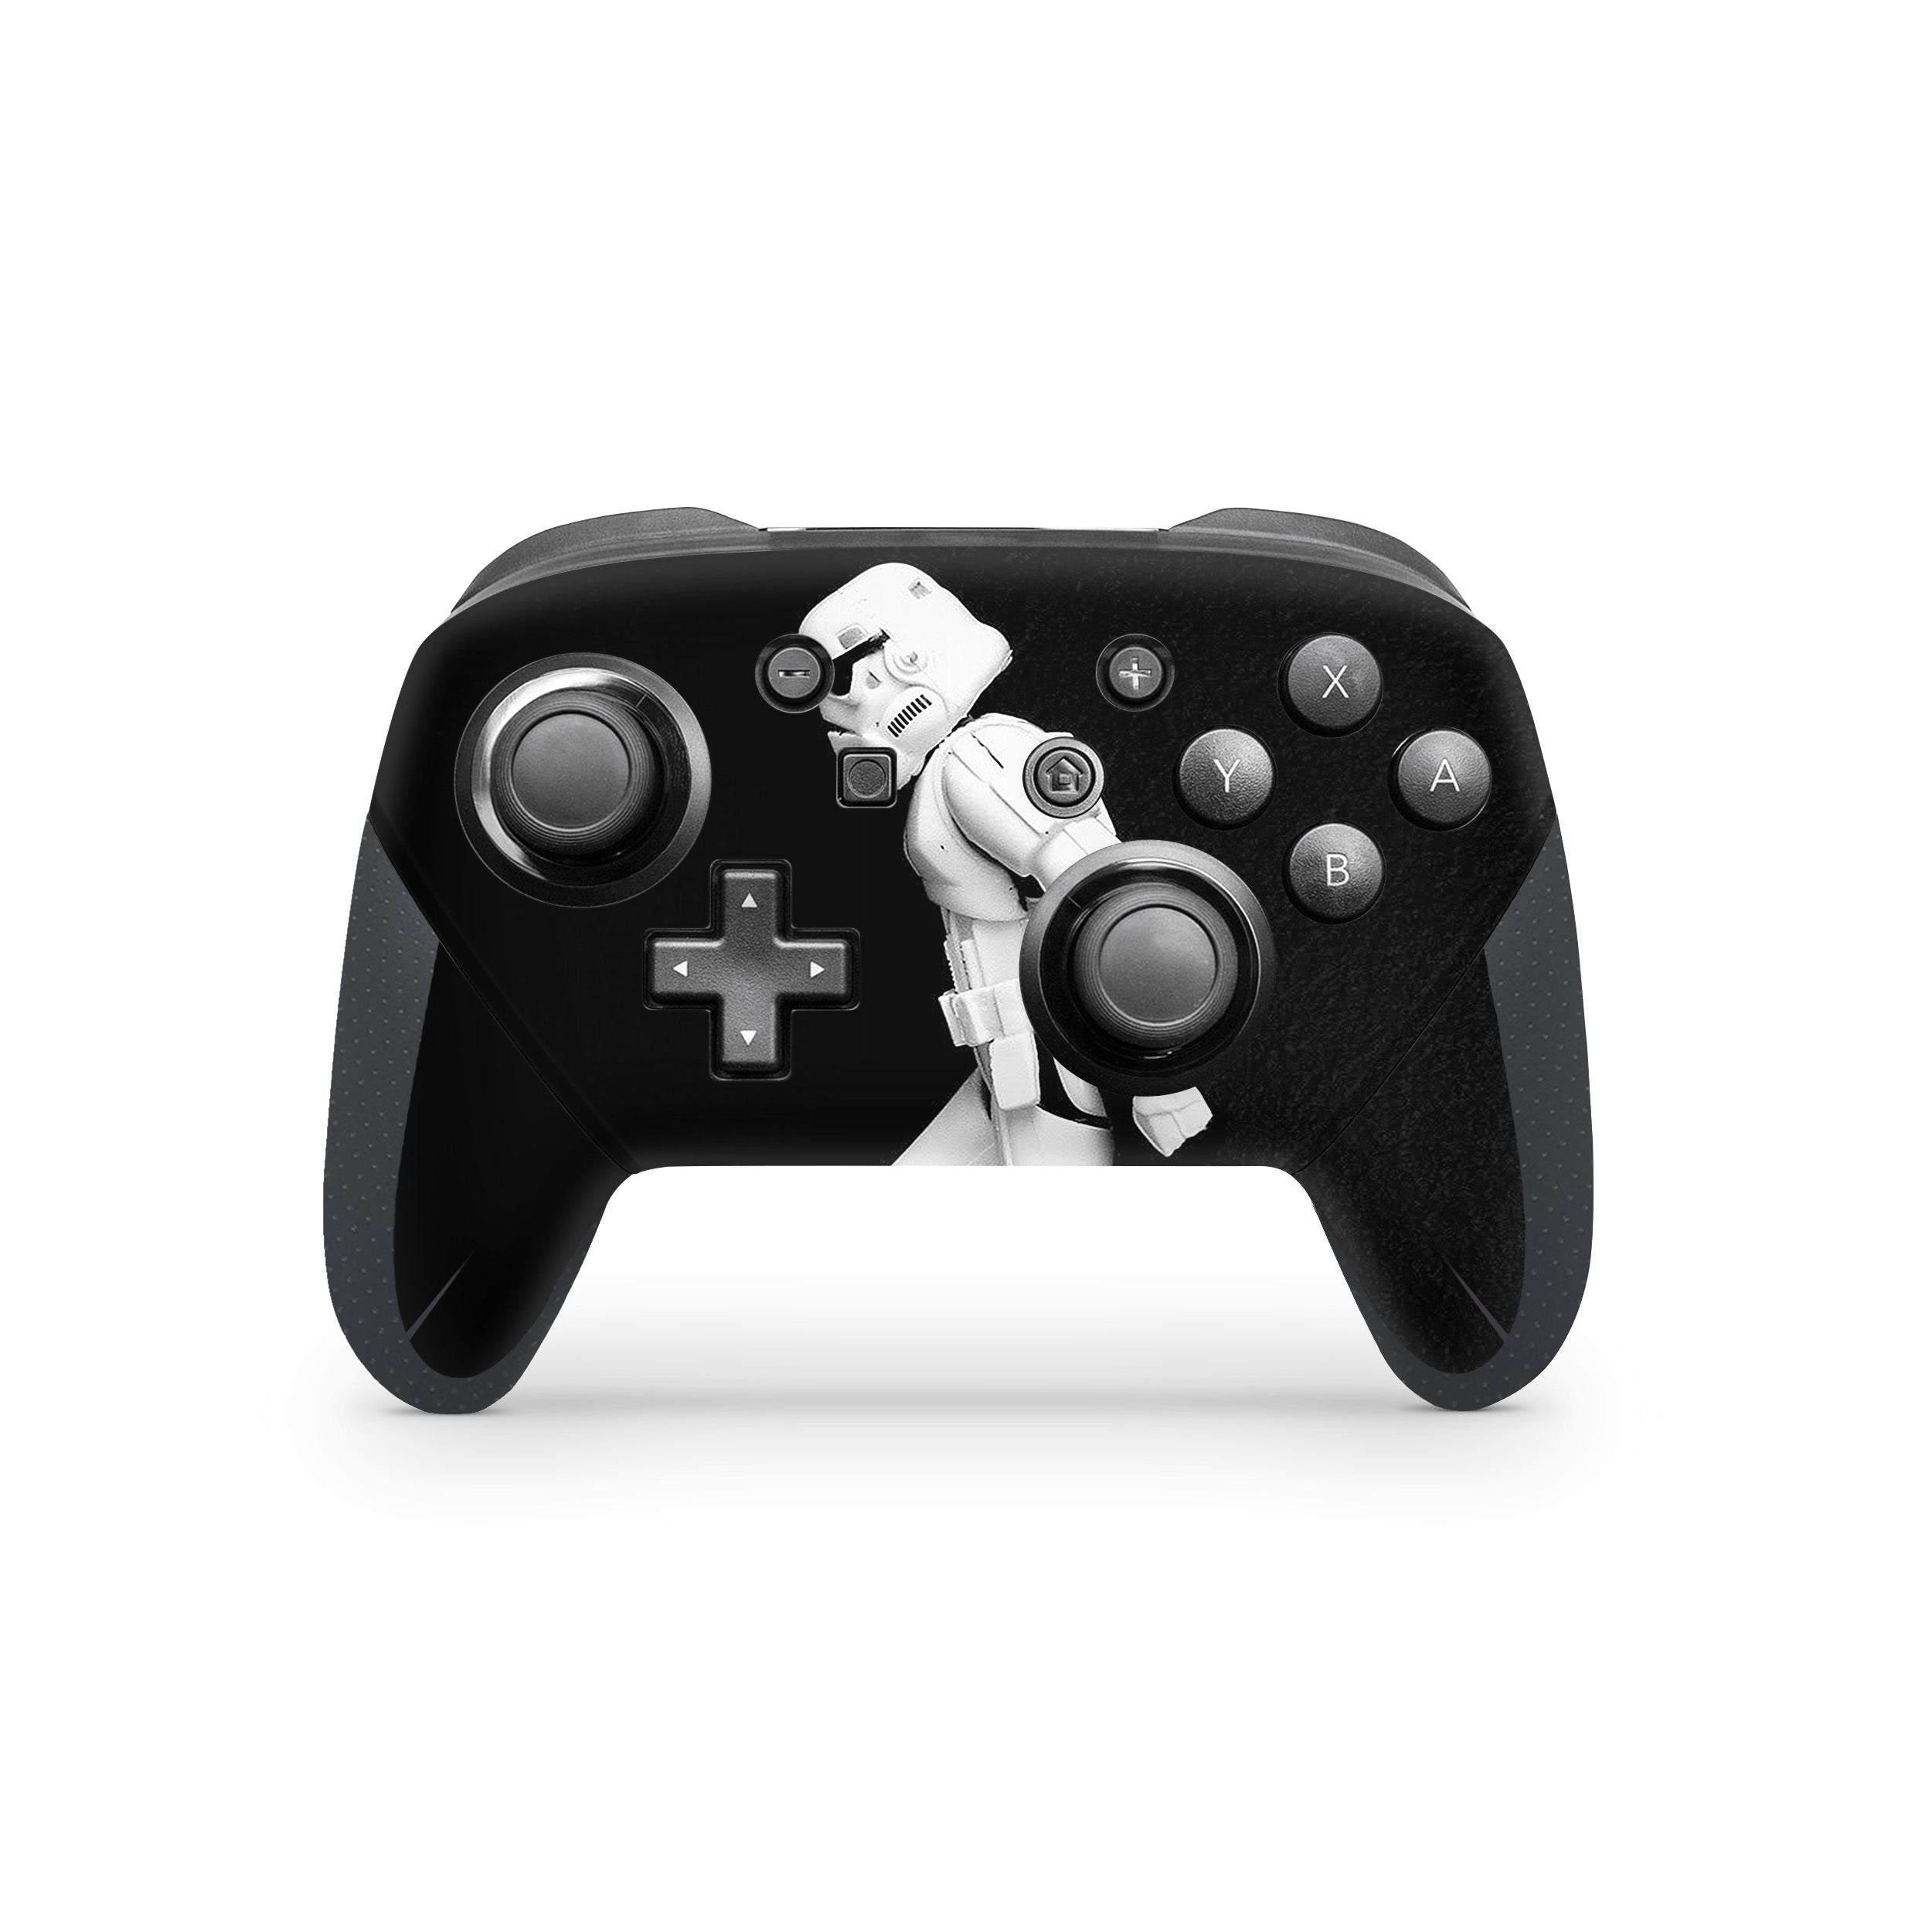 A video game skin featuring a Star Wars Storm Trooper design for the Switch Pro Controller.